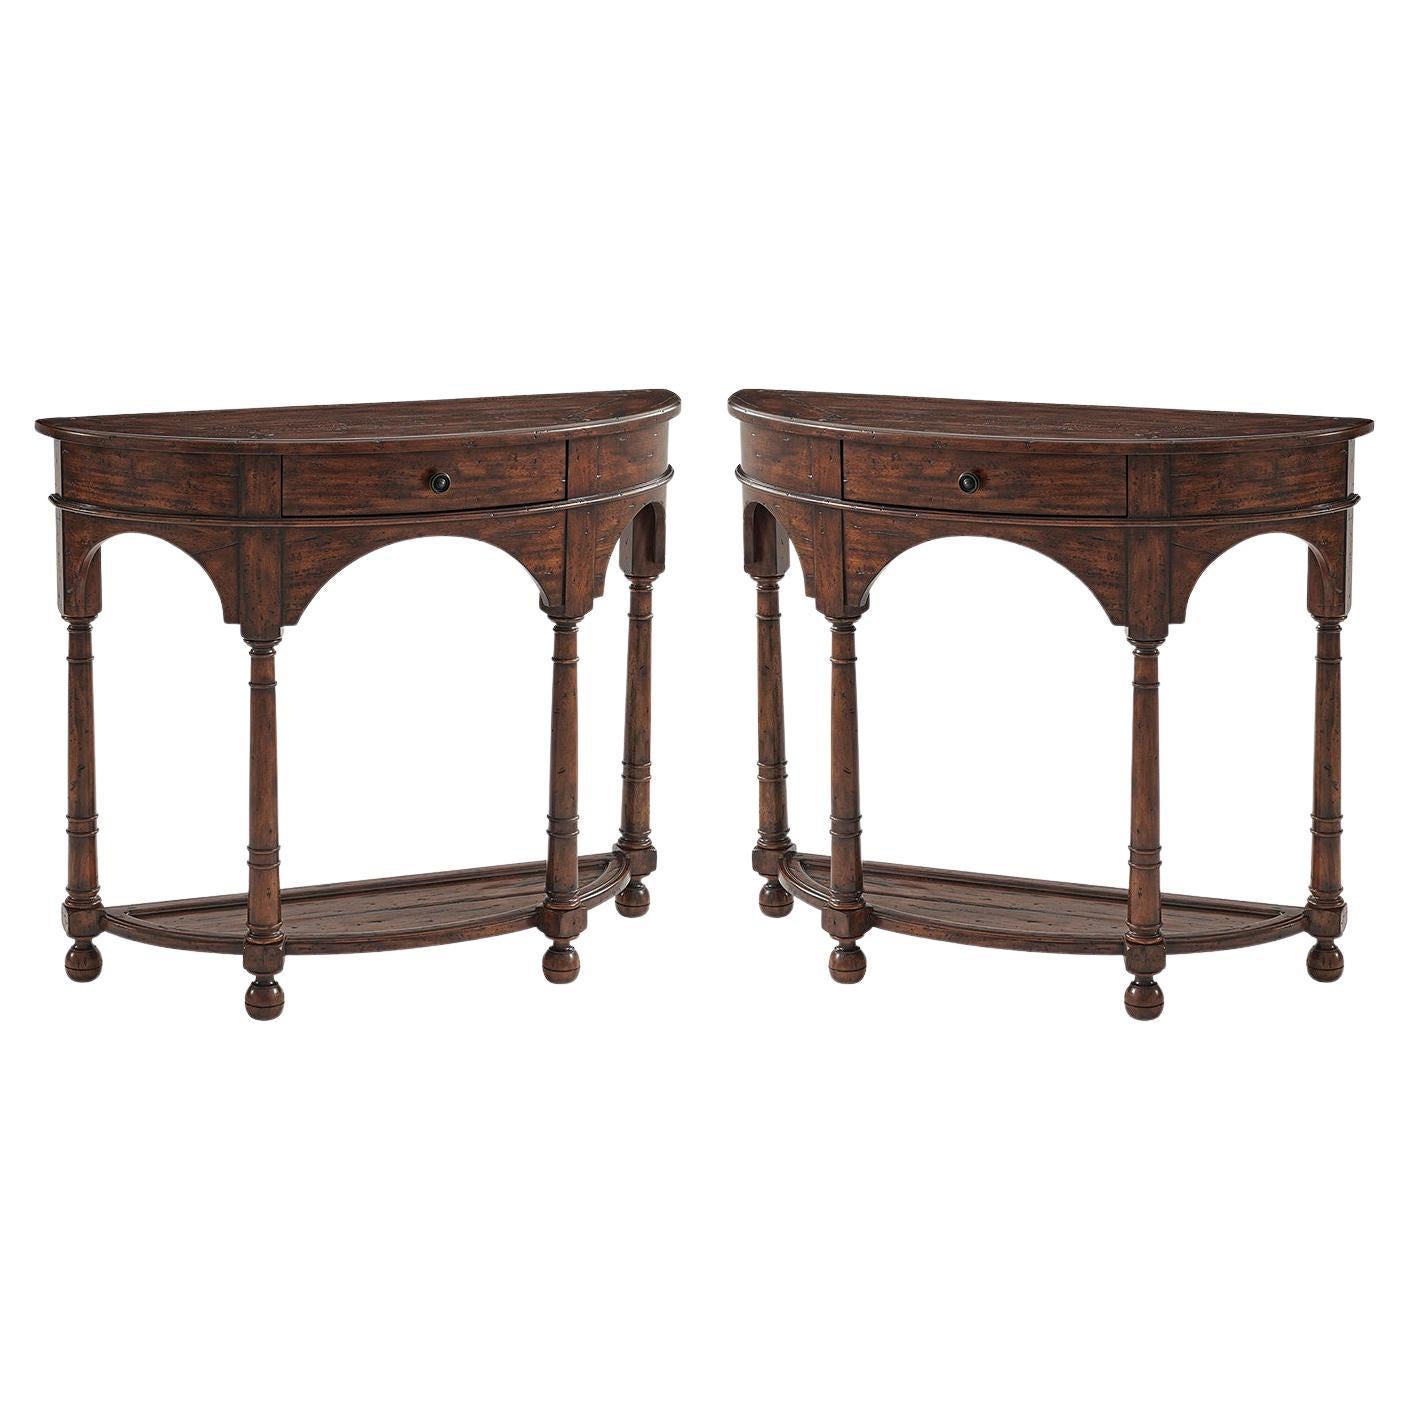 Pair of Italian Provincial Bowfront Console Tables